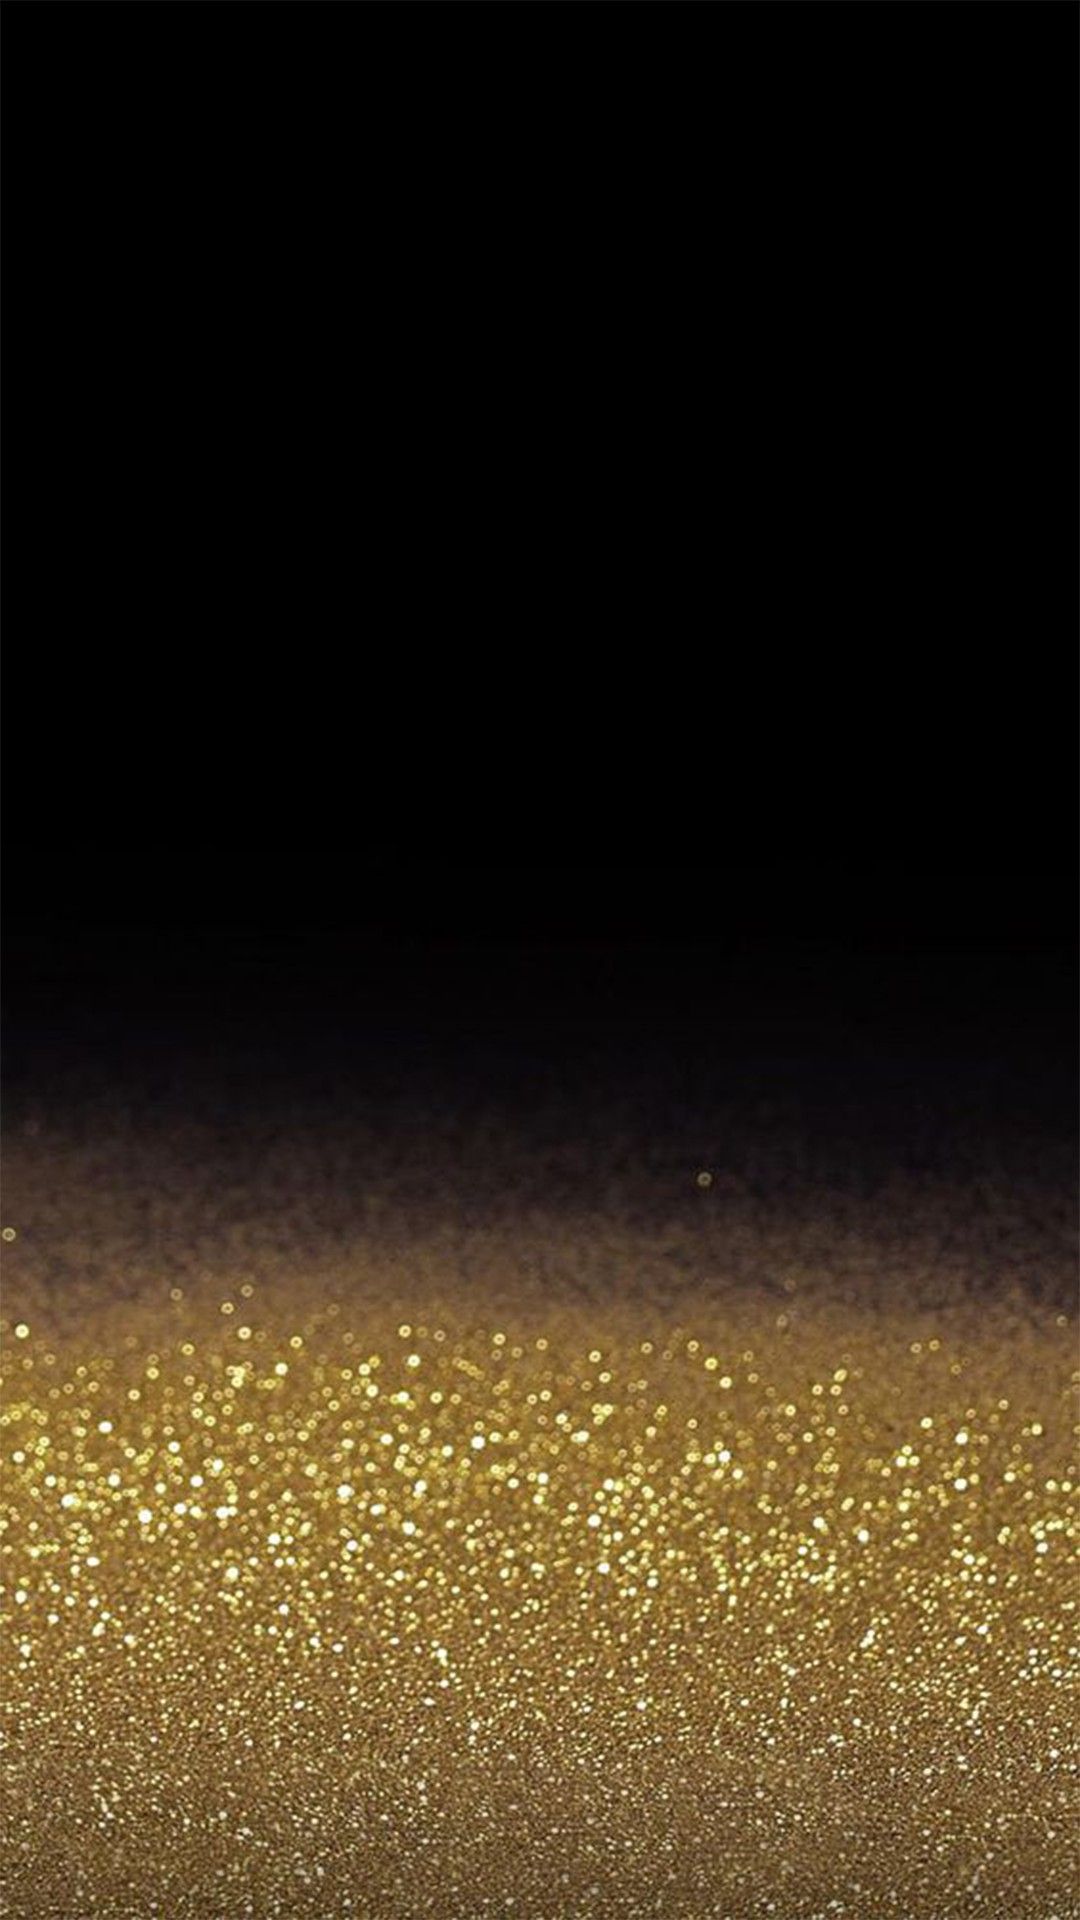 AMOLED Abstract Wallpaper. AMOLED Wallpaper. Black Background for Android and iPhone. Black phone wallpaper, Glitter wallpaper, Gold wallpaper phone